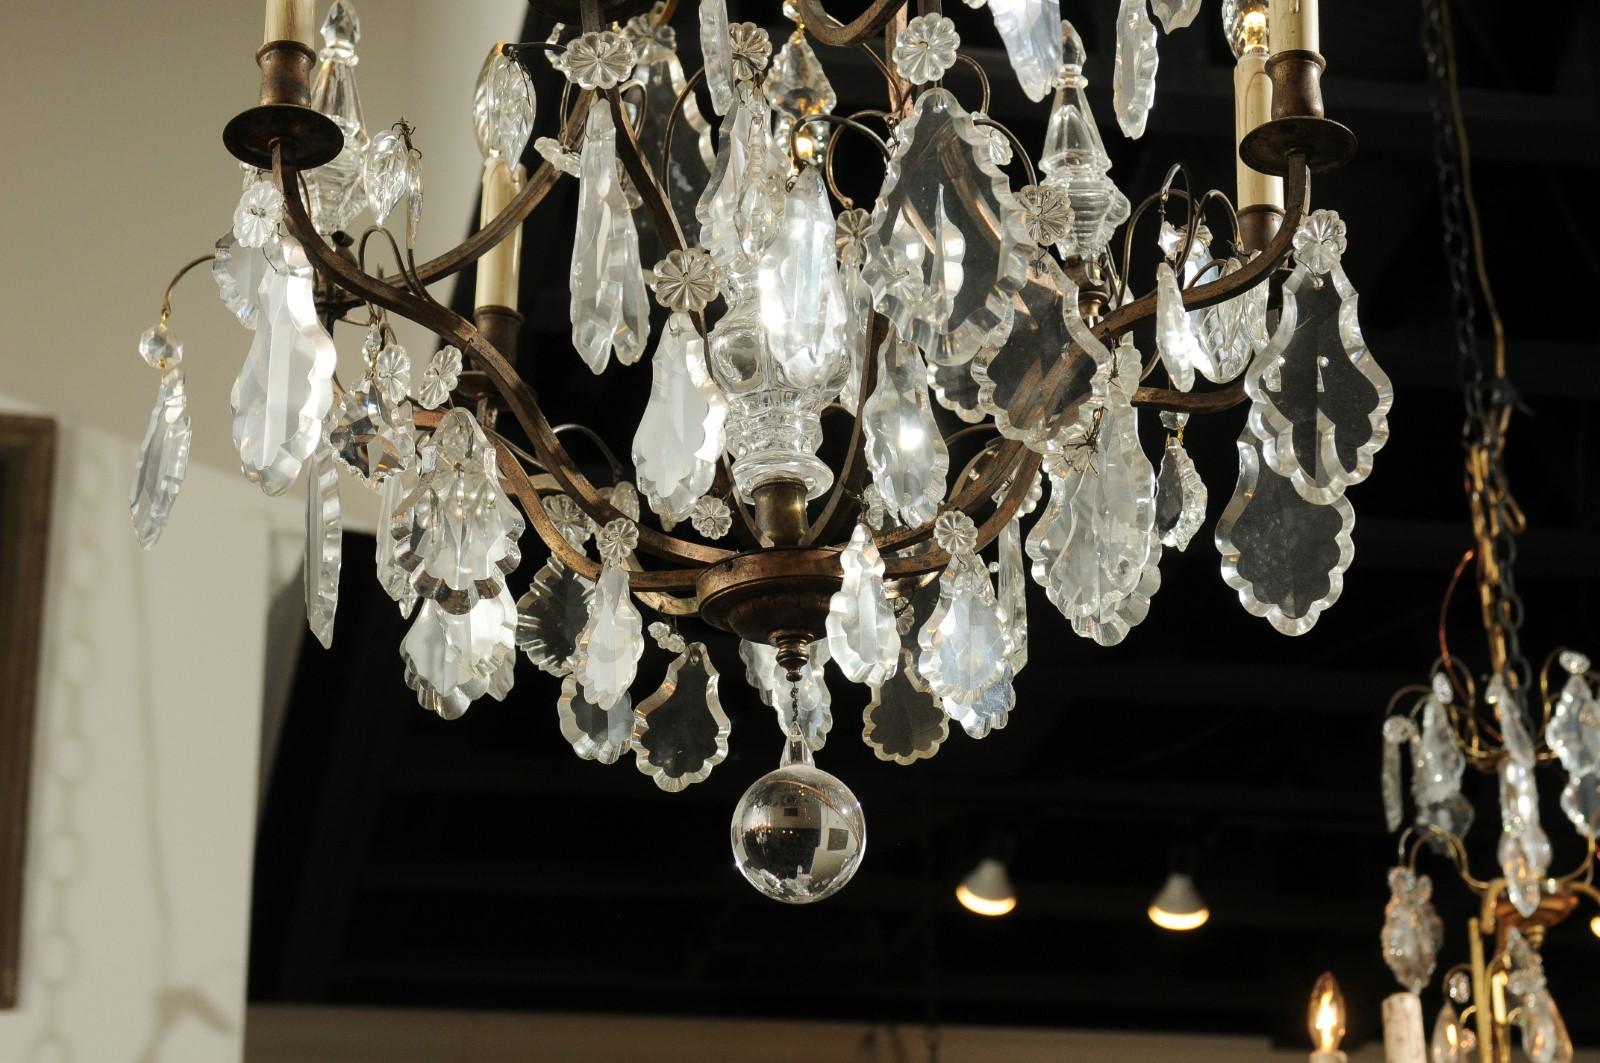 French Six-Light Crystal and Iron Chandelier with Obelisks, Late 19th Century For Sale 5